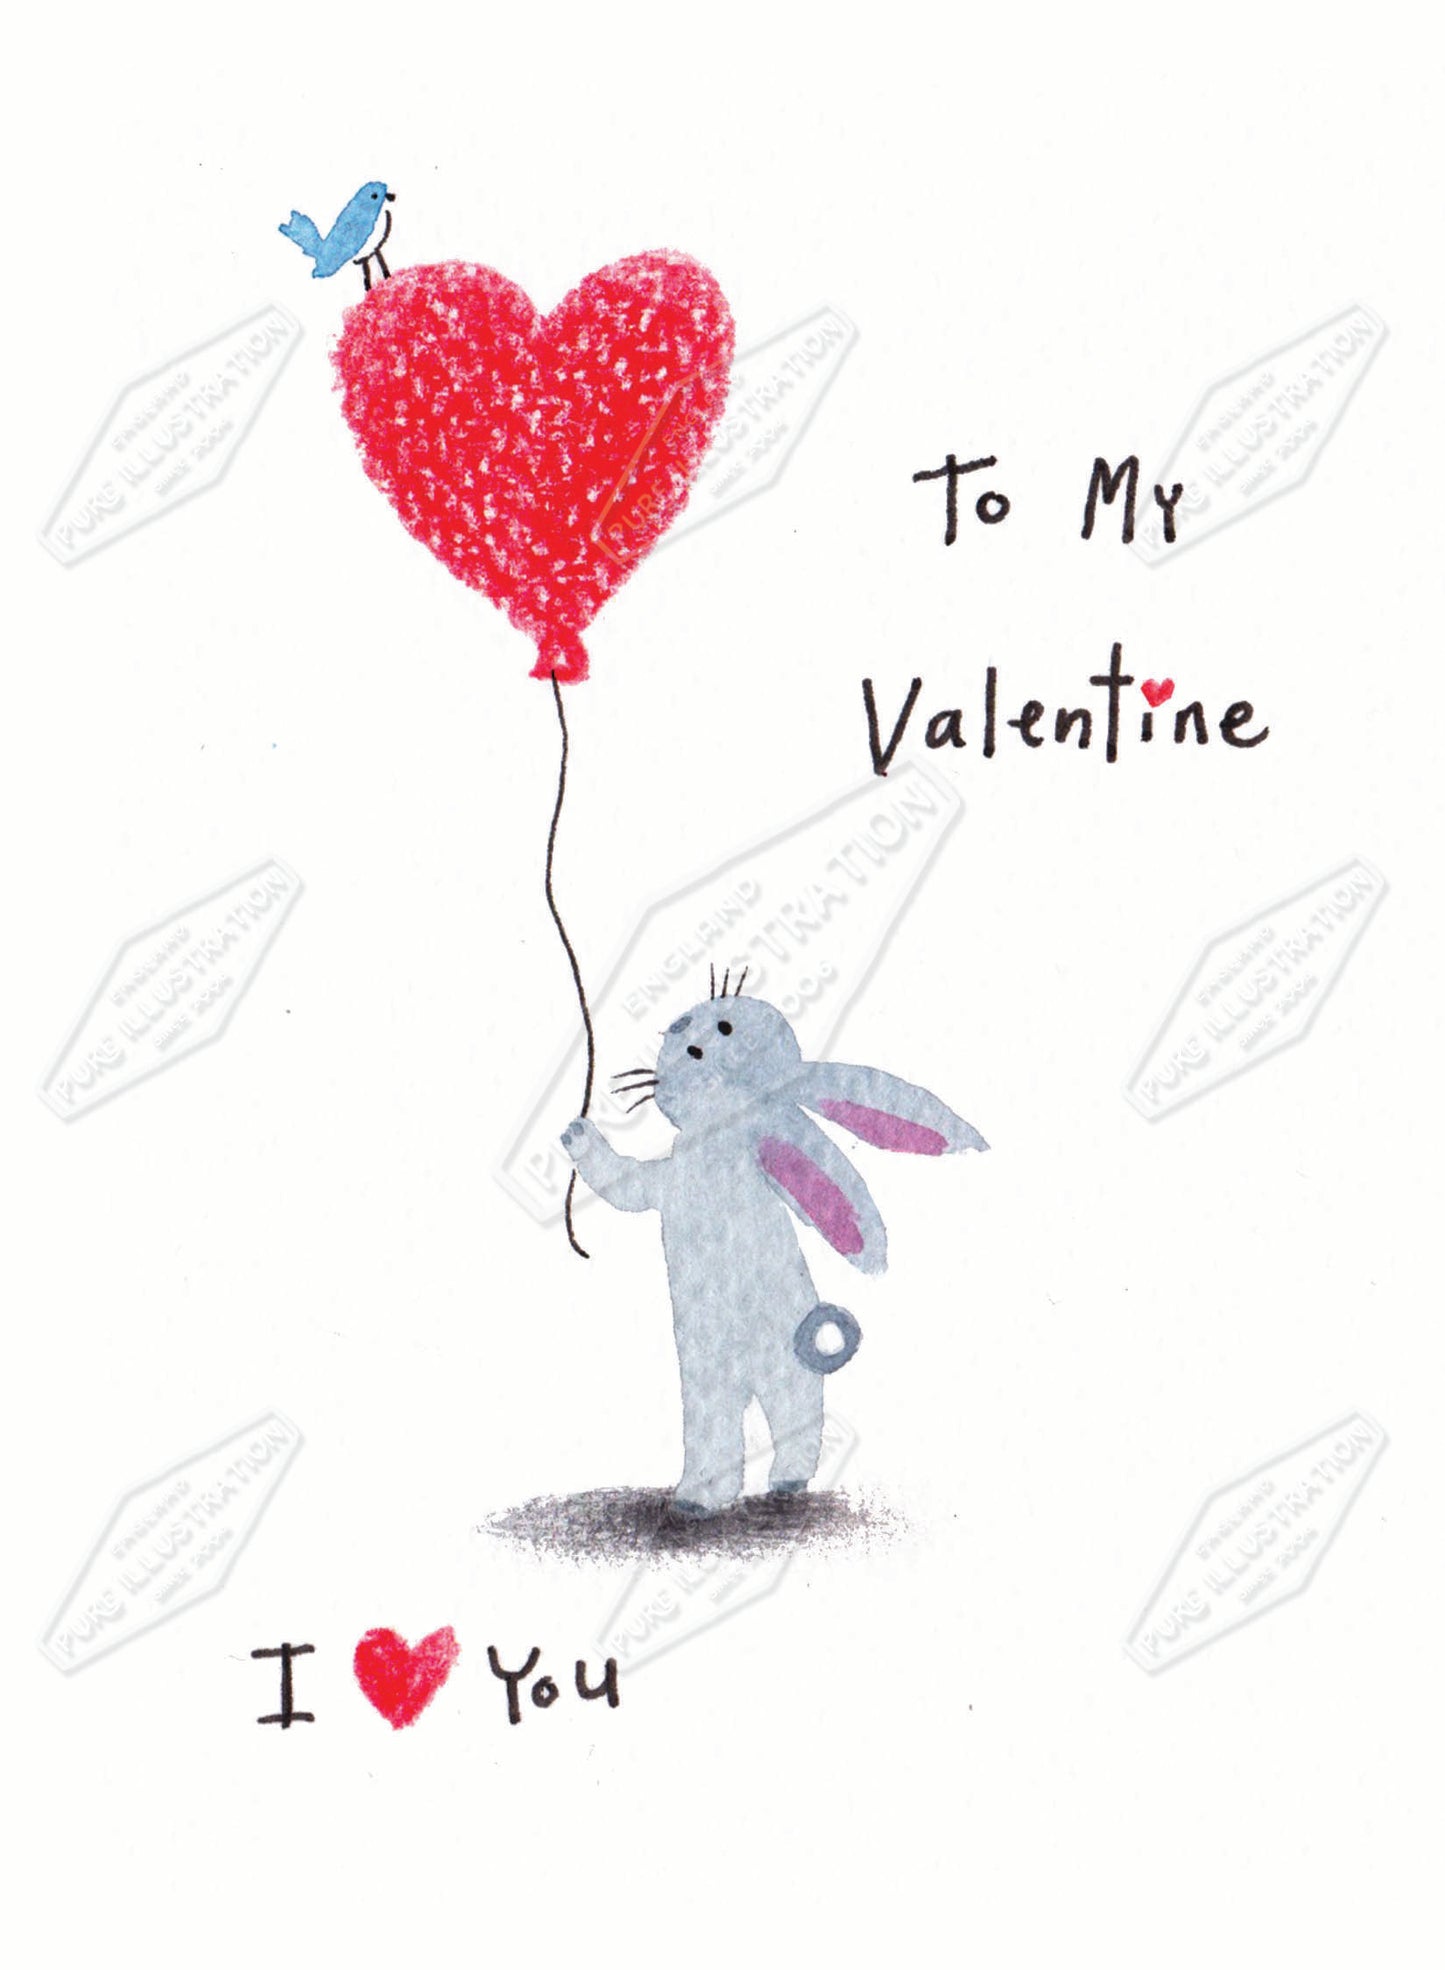 00035813AMA - Ally Marie is represented by Pure Art Licensing Agency - Valentine's Day Greeting Card Design